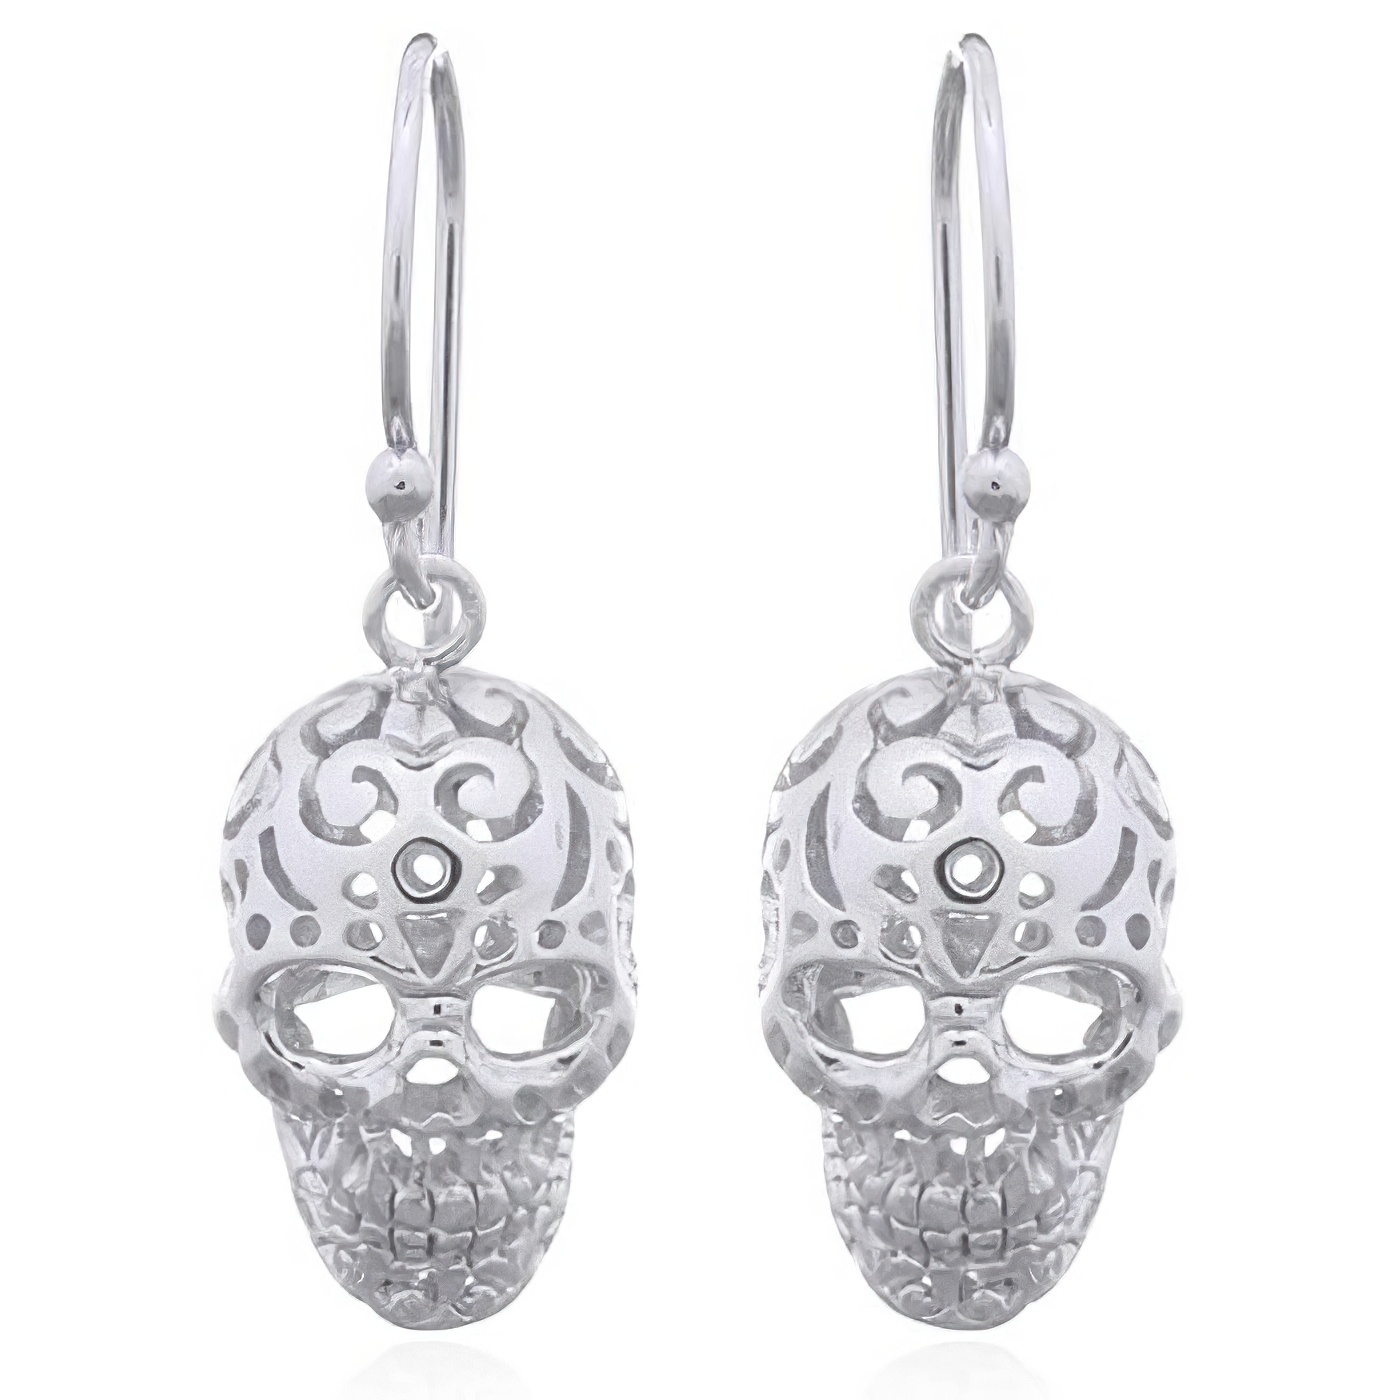 Rhodium Plated Skull Perforated Pattern Dangle Earrings 925 Silver by BeYindi 